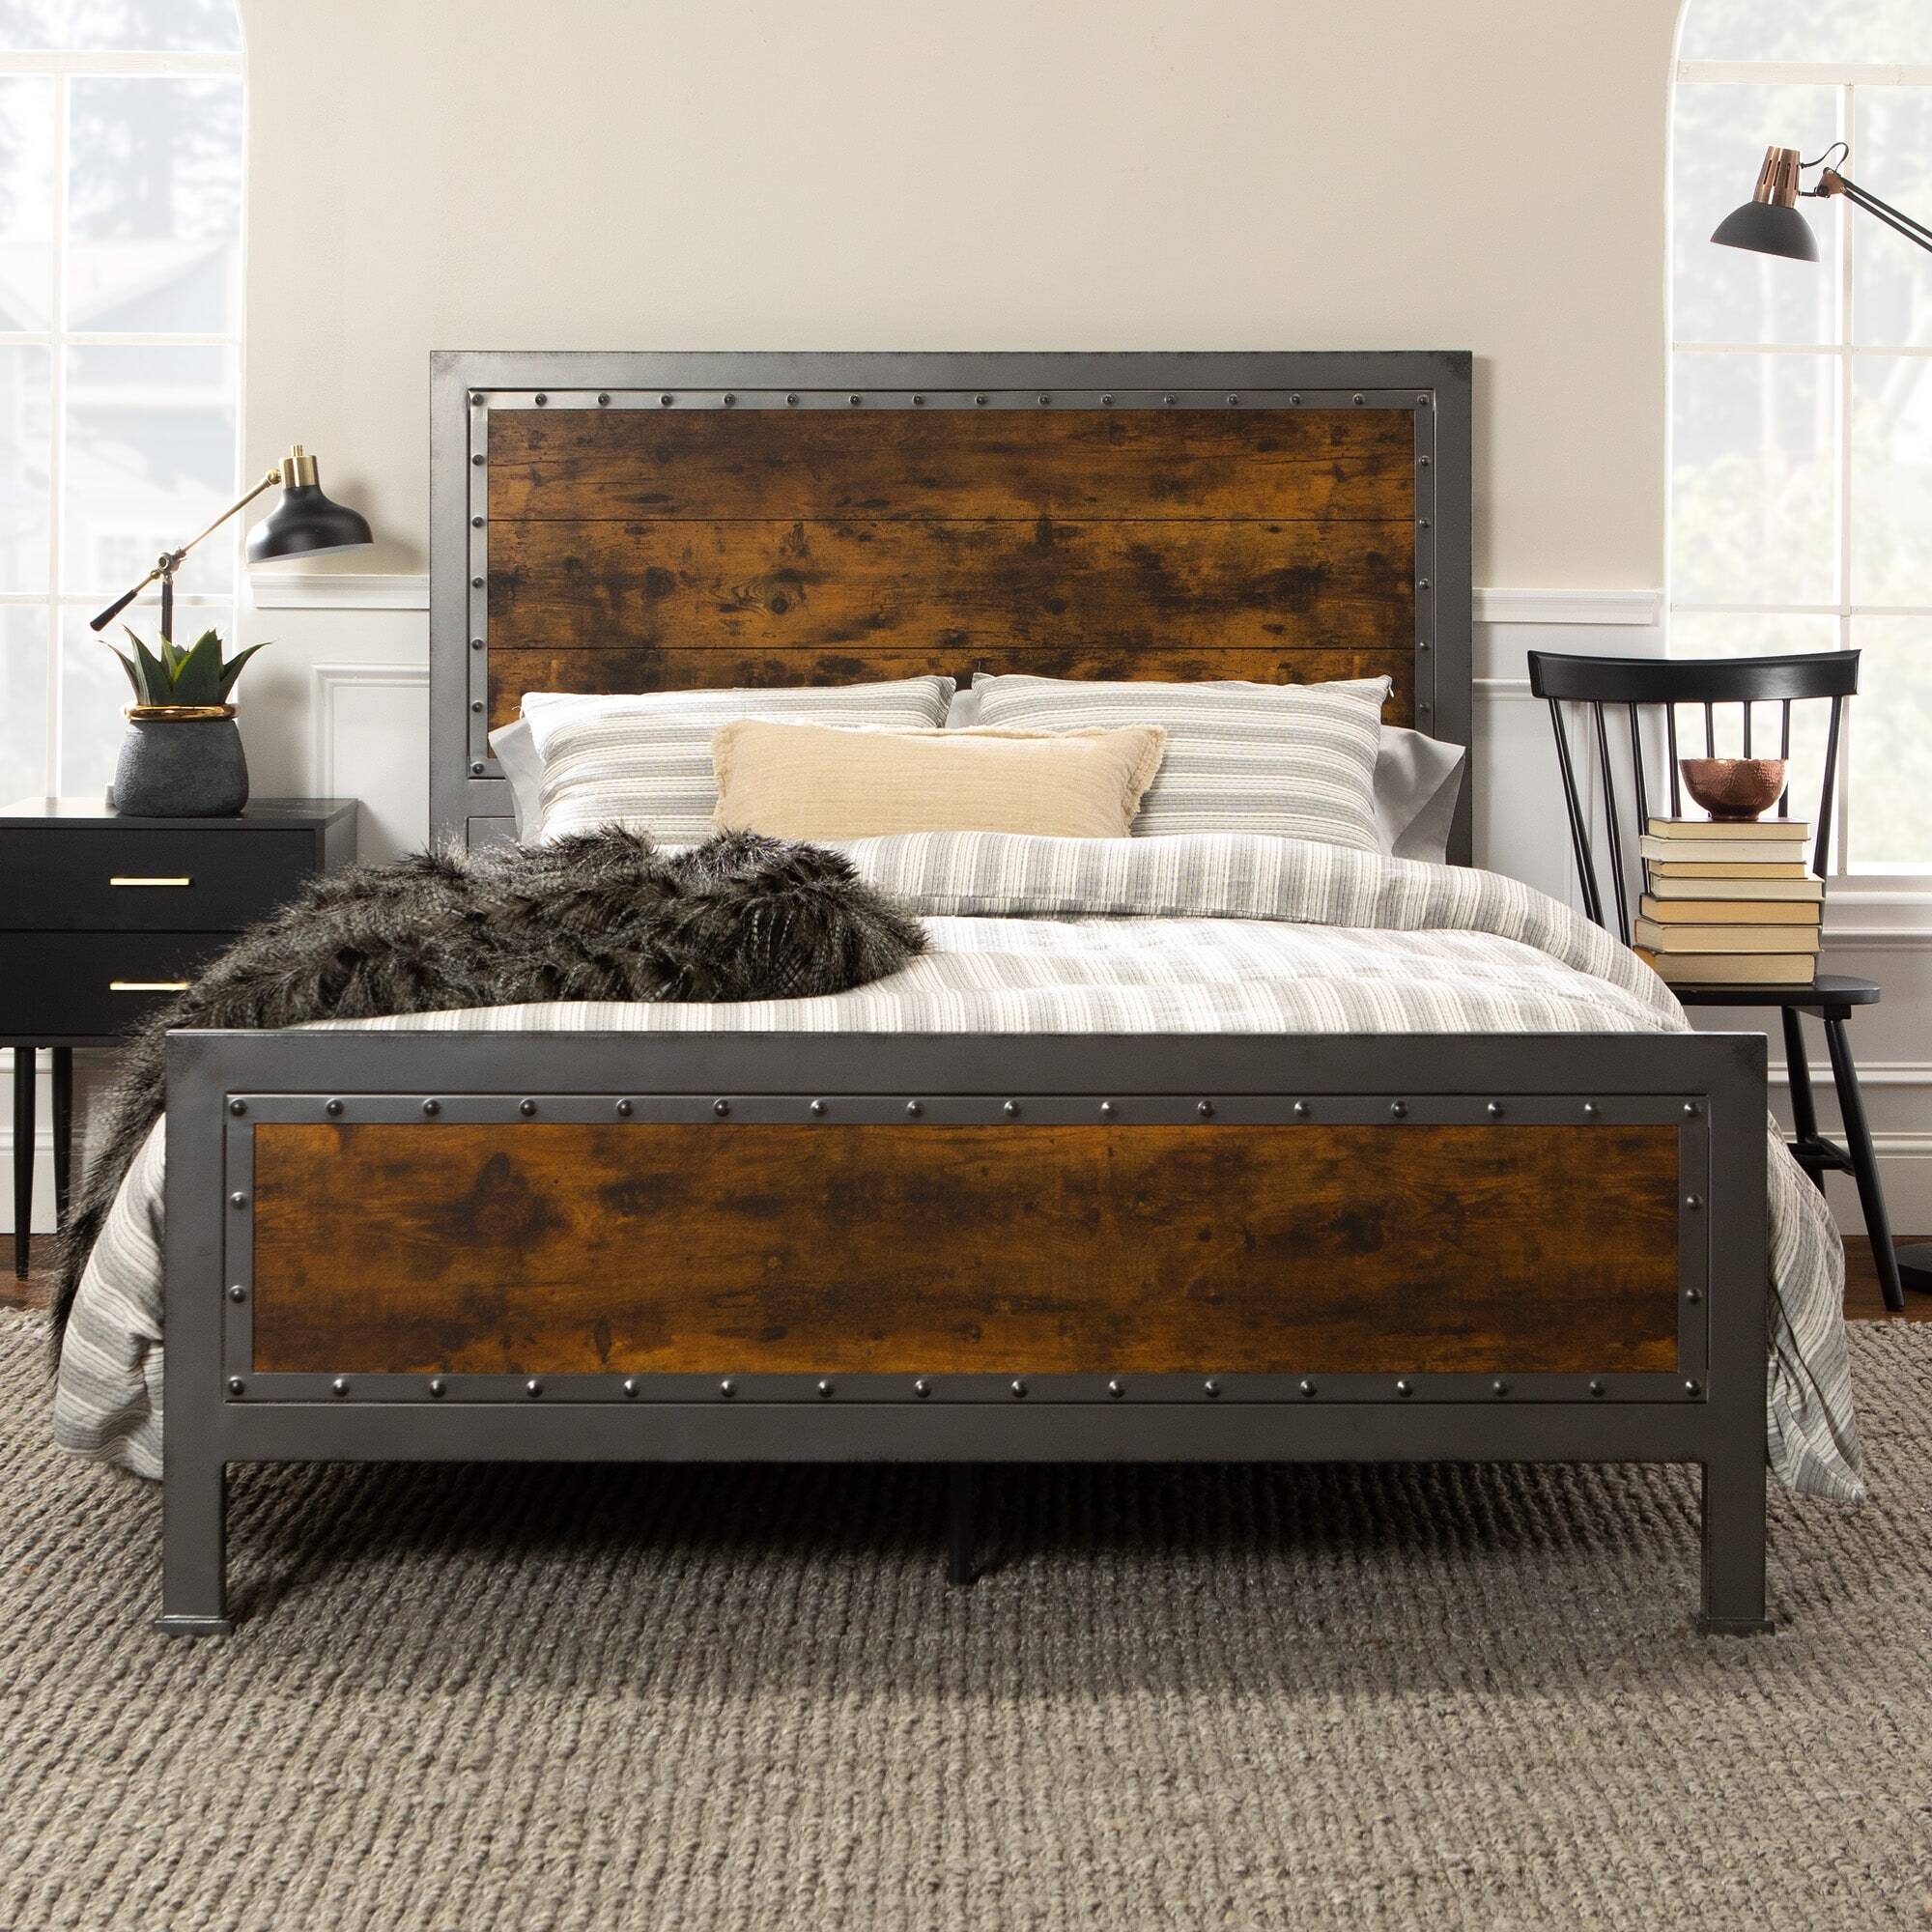 Solid Panel Wood and Metal Headboard and Footboard With Nailhead Trim